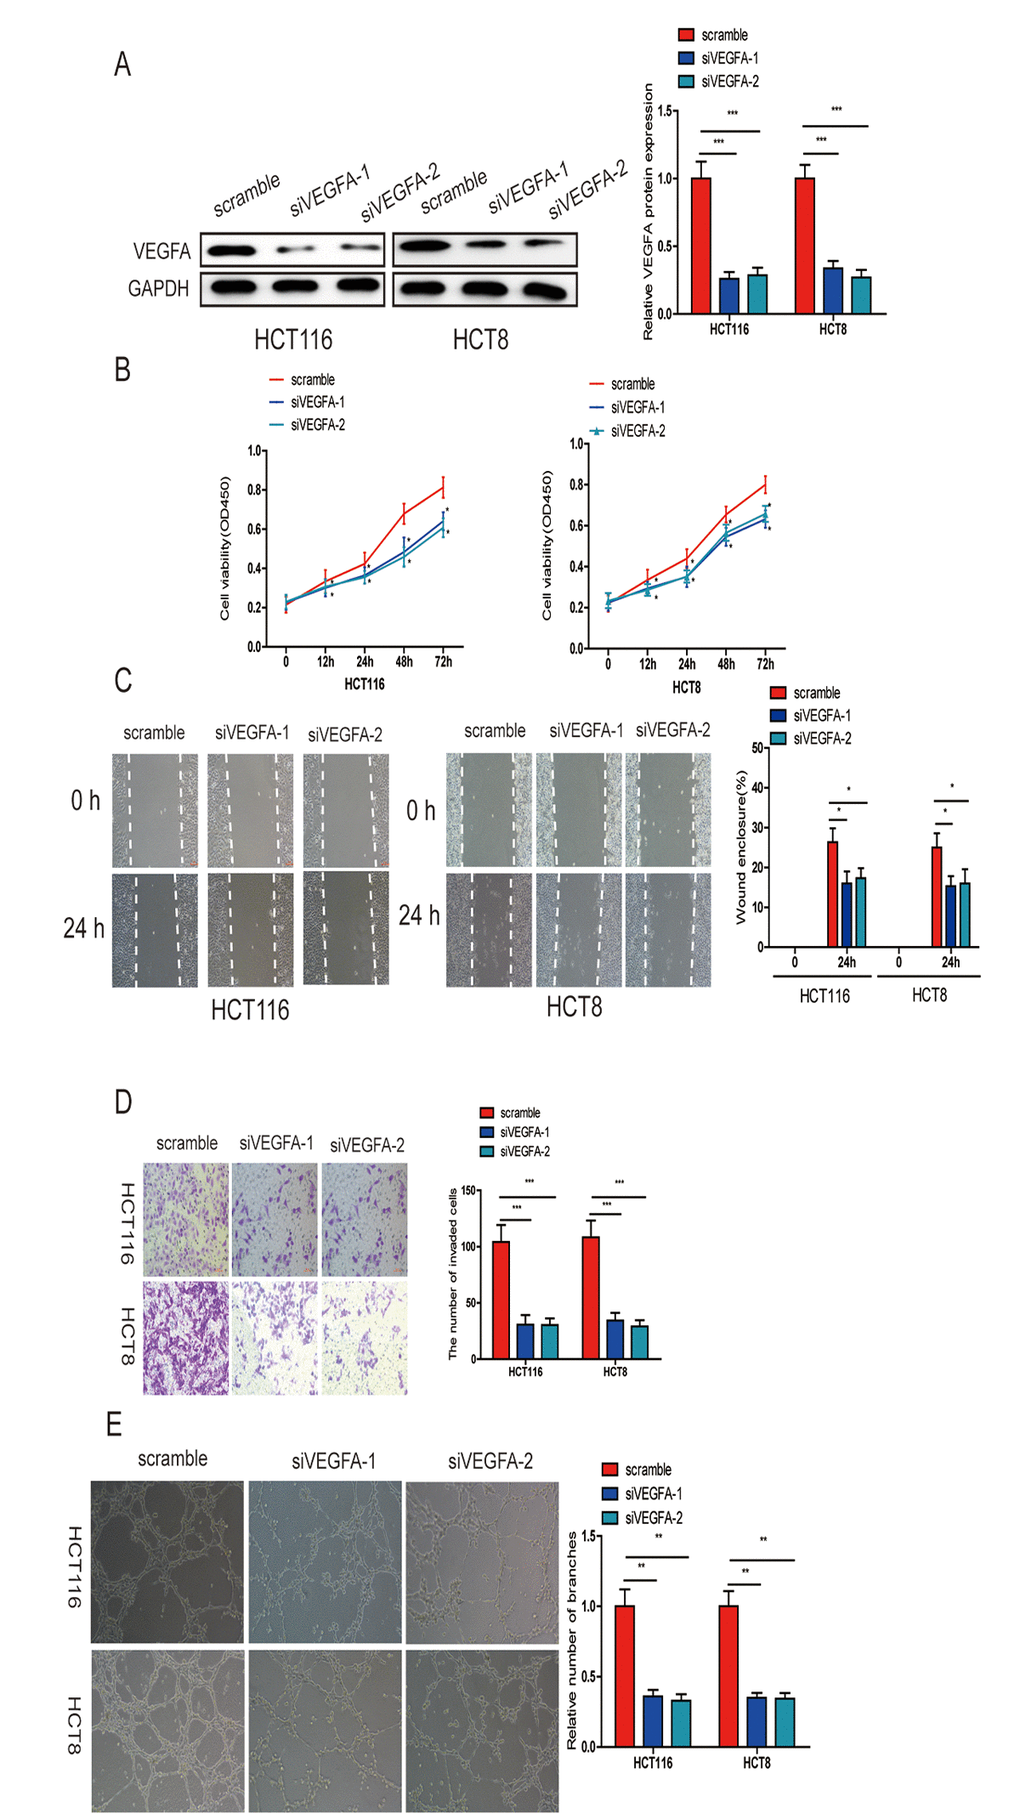 VEGFA knockdown significantly inhibited CRC progression. (A) VEGFA expression was downregulated in HCT116 and HCT8 cells transfected with siVEGFA-1 or siVEGFA-2. (B) VEGFA knockdown inhibited CRC cell proliferation (B), migration (C), invasion (D) and HUVECs tube formation (E). Data are shown as the mean±SD of three independent experiments. *ppp